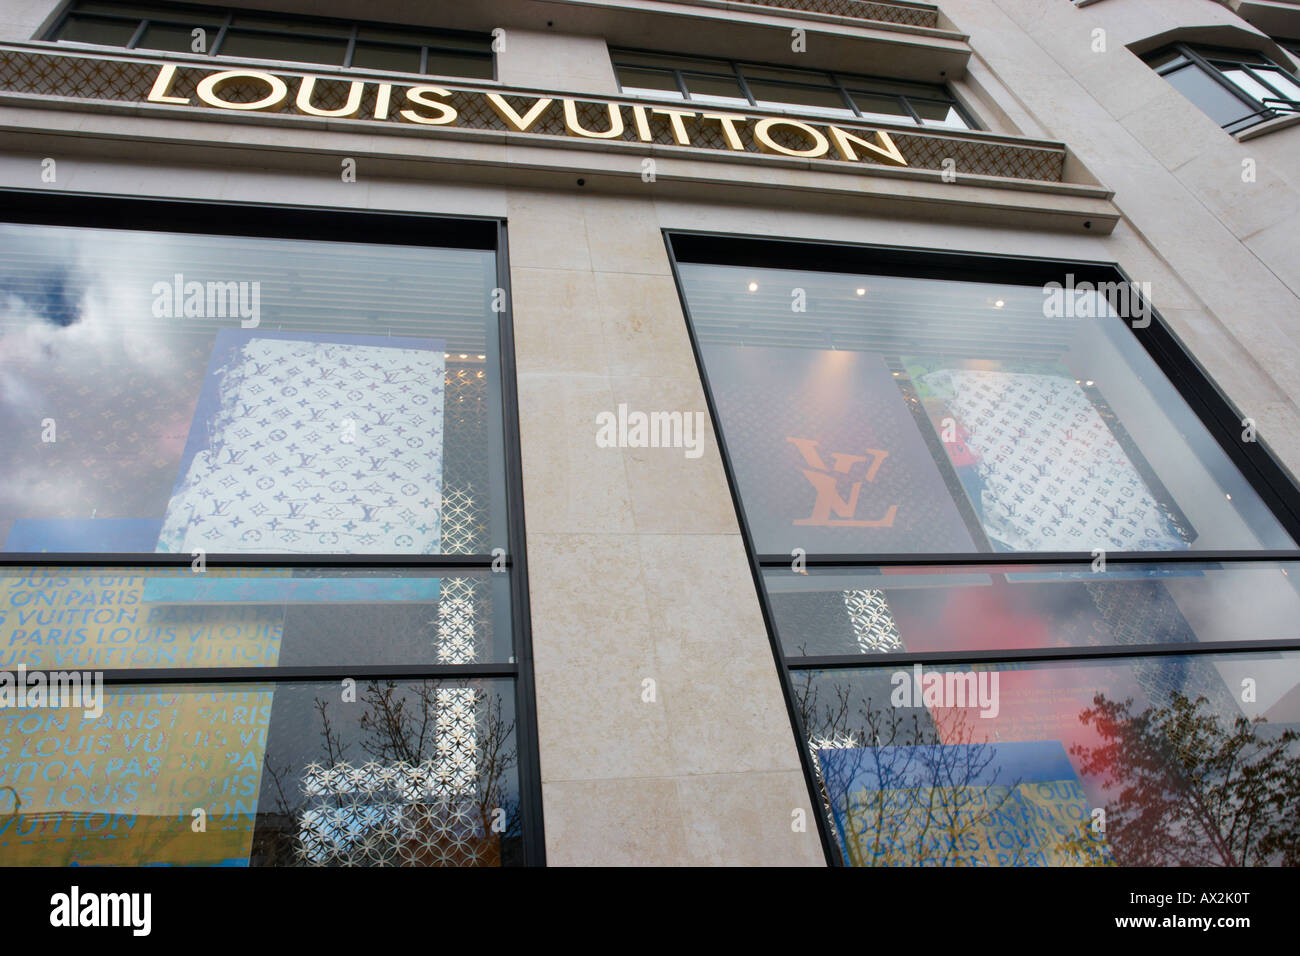 Shopping At Louis Vuitton In Paris Stock Photo - Download Image Now - 2015,  Avenue des Champs-Elysees, Flagship Store - iStock